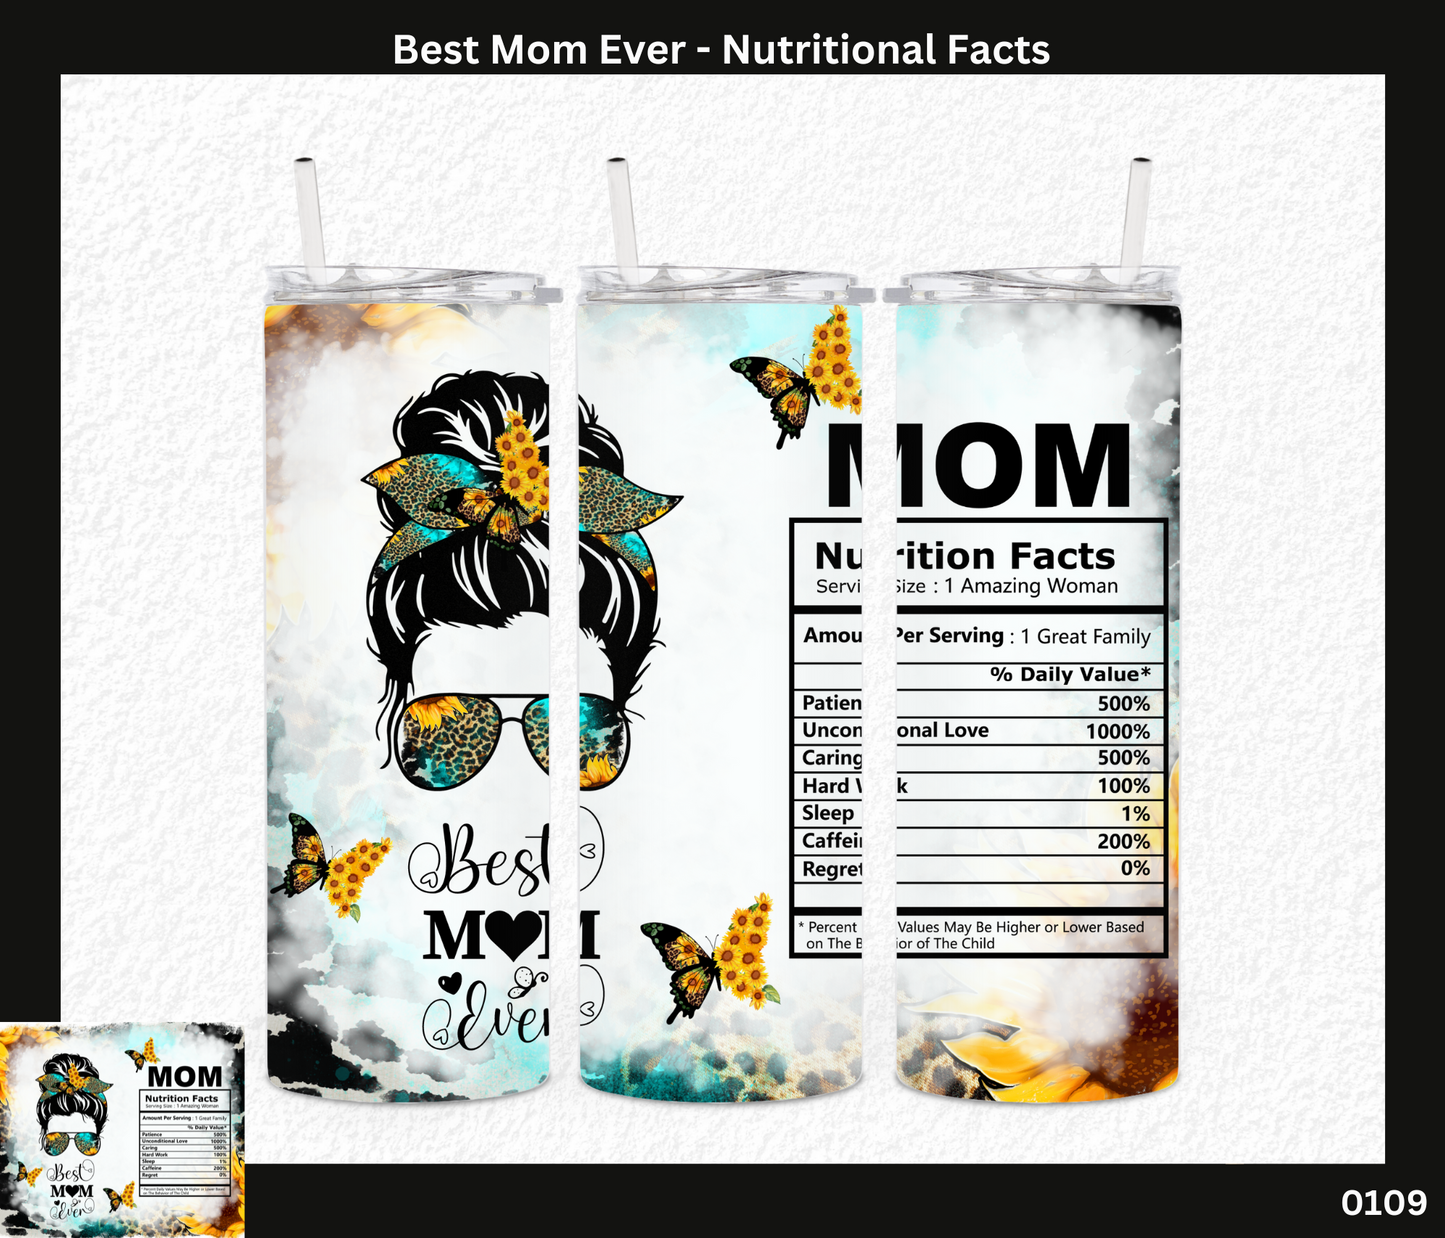 Best Mom Ever - Nutritional Facts